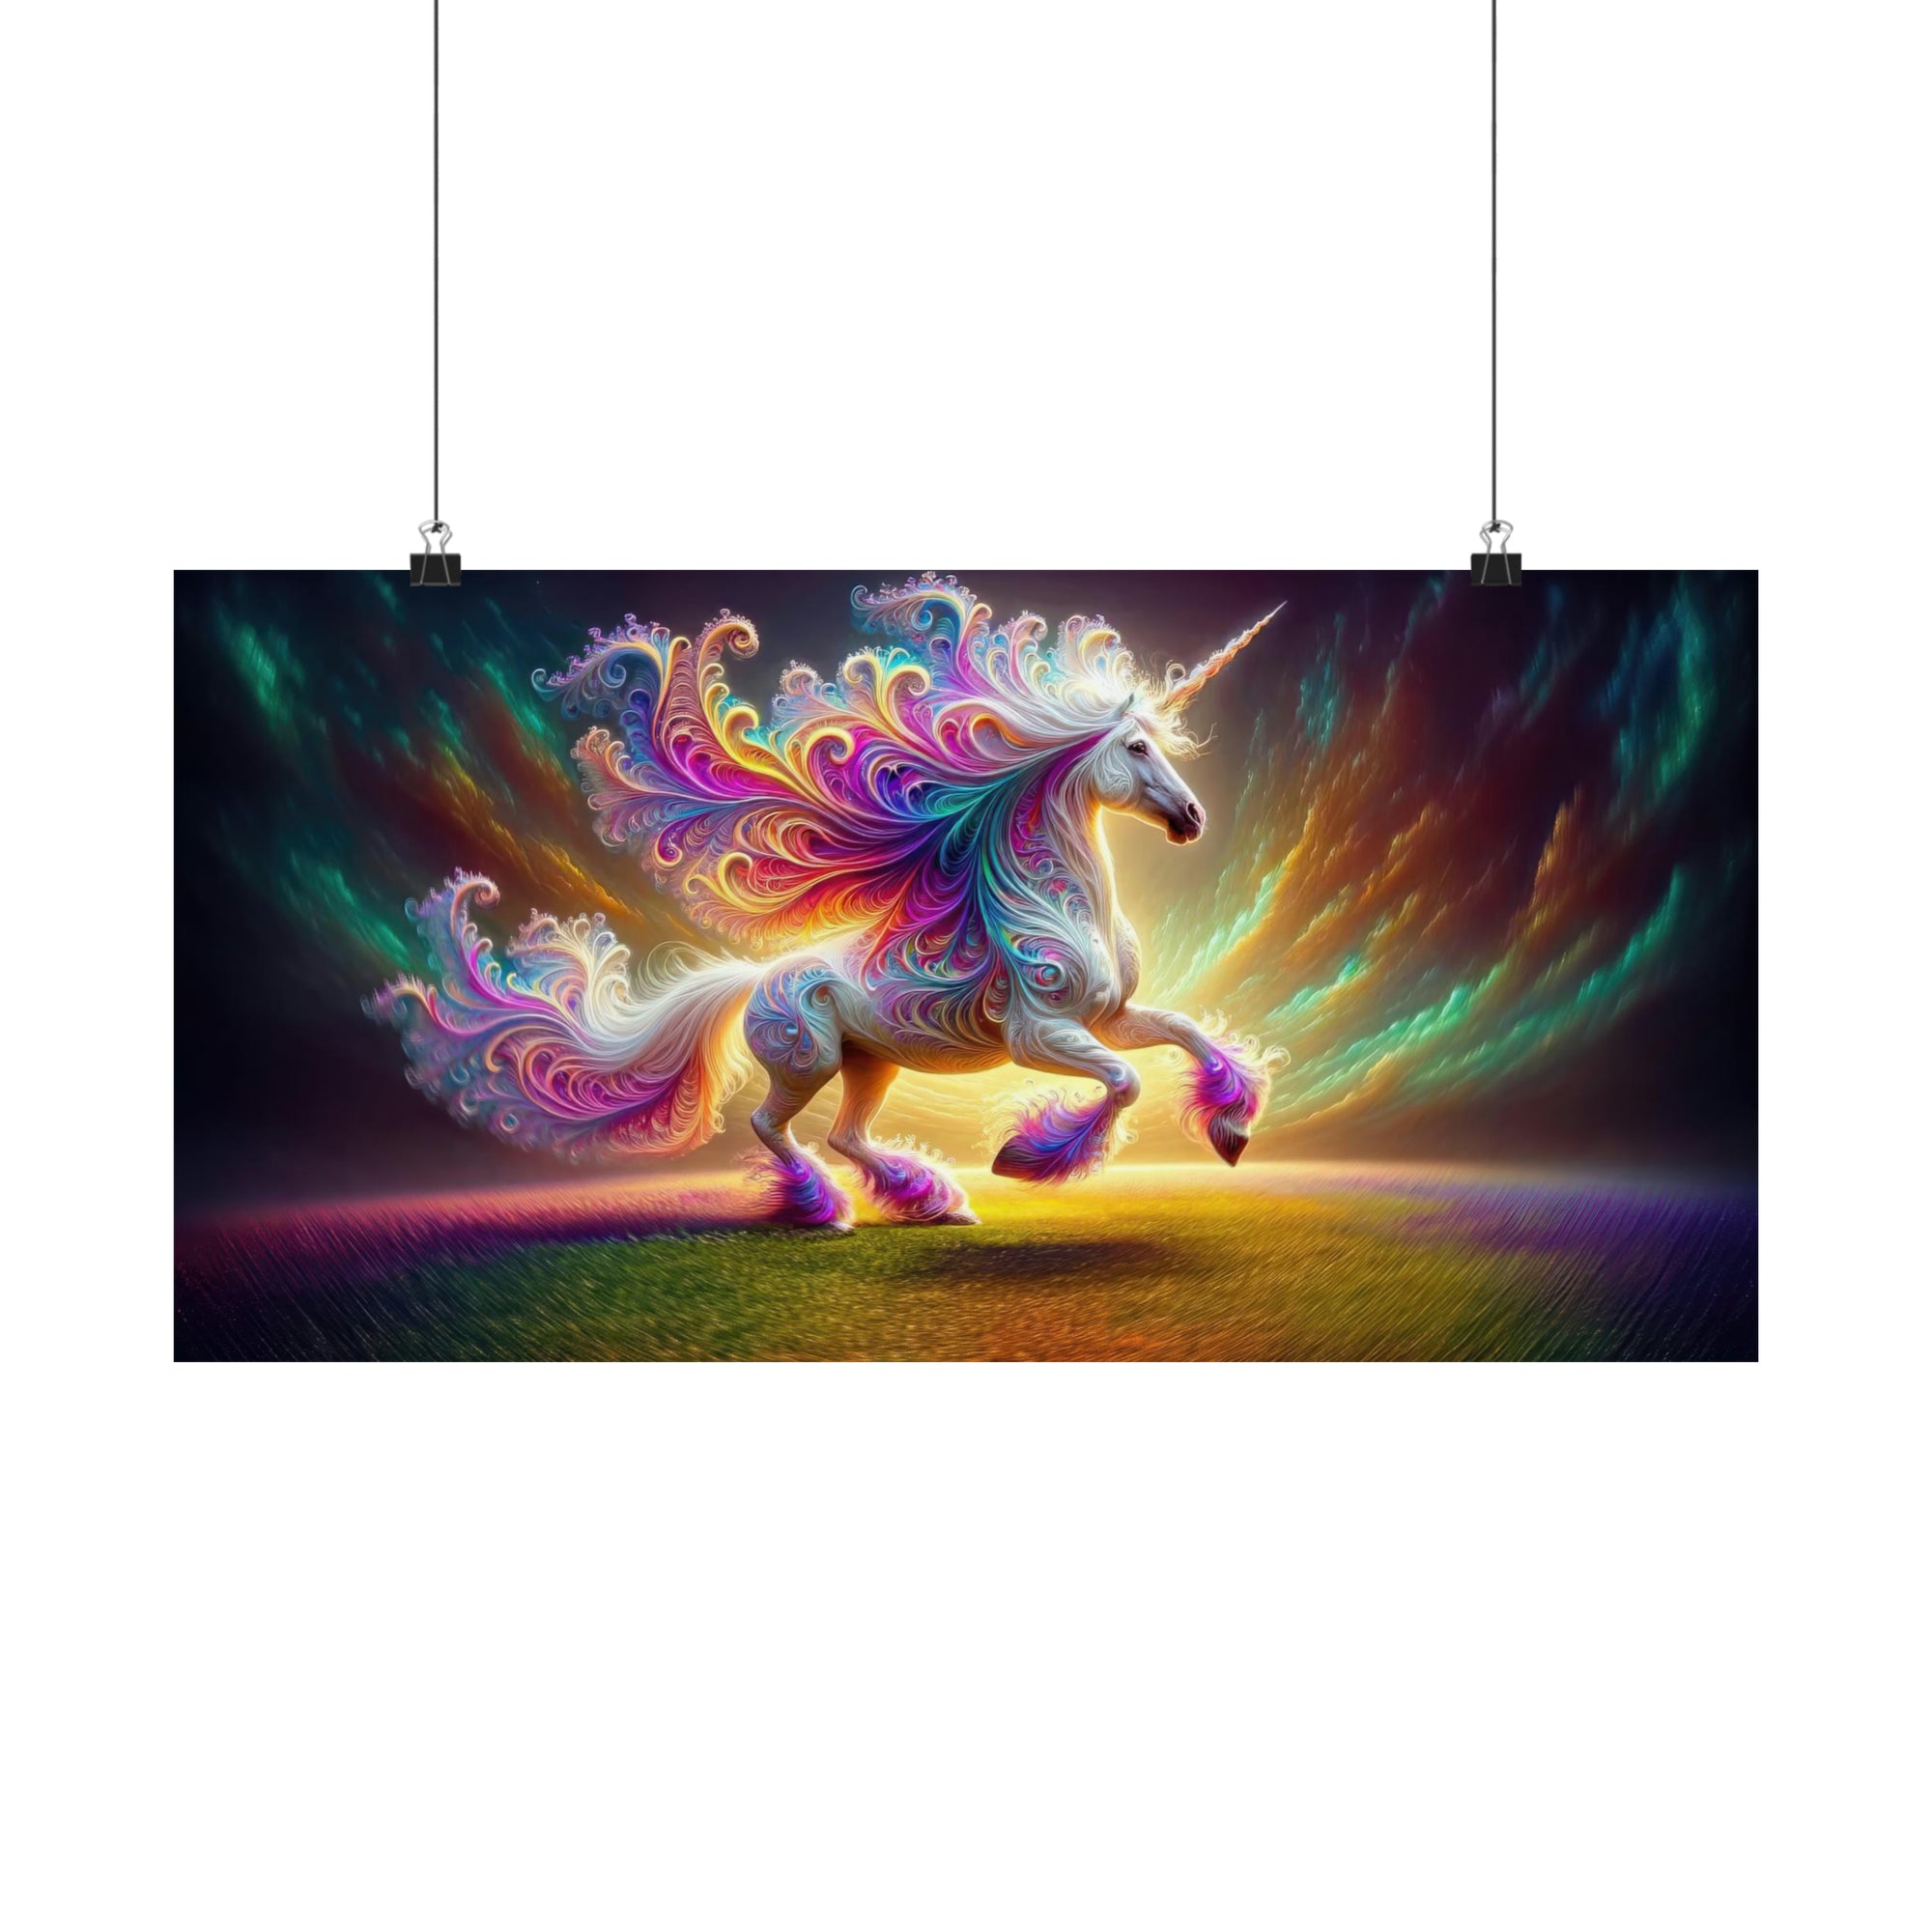 The Unicorn's Realm Poster